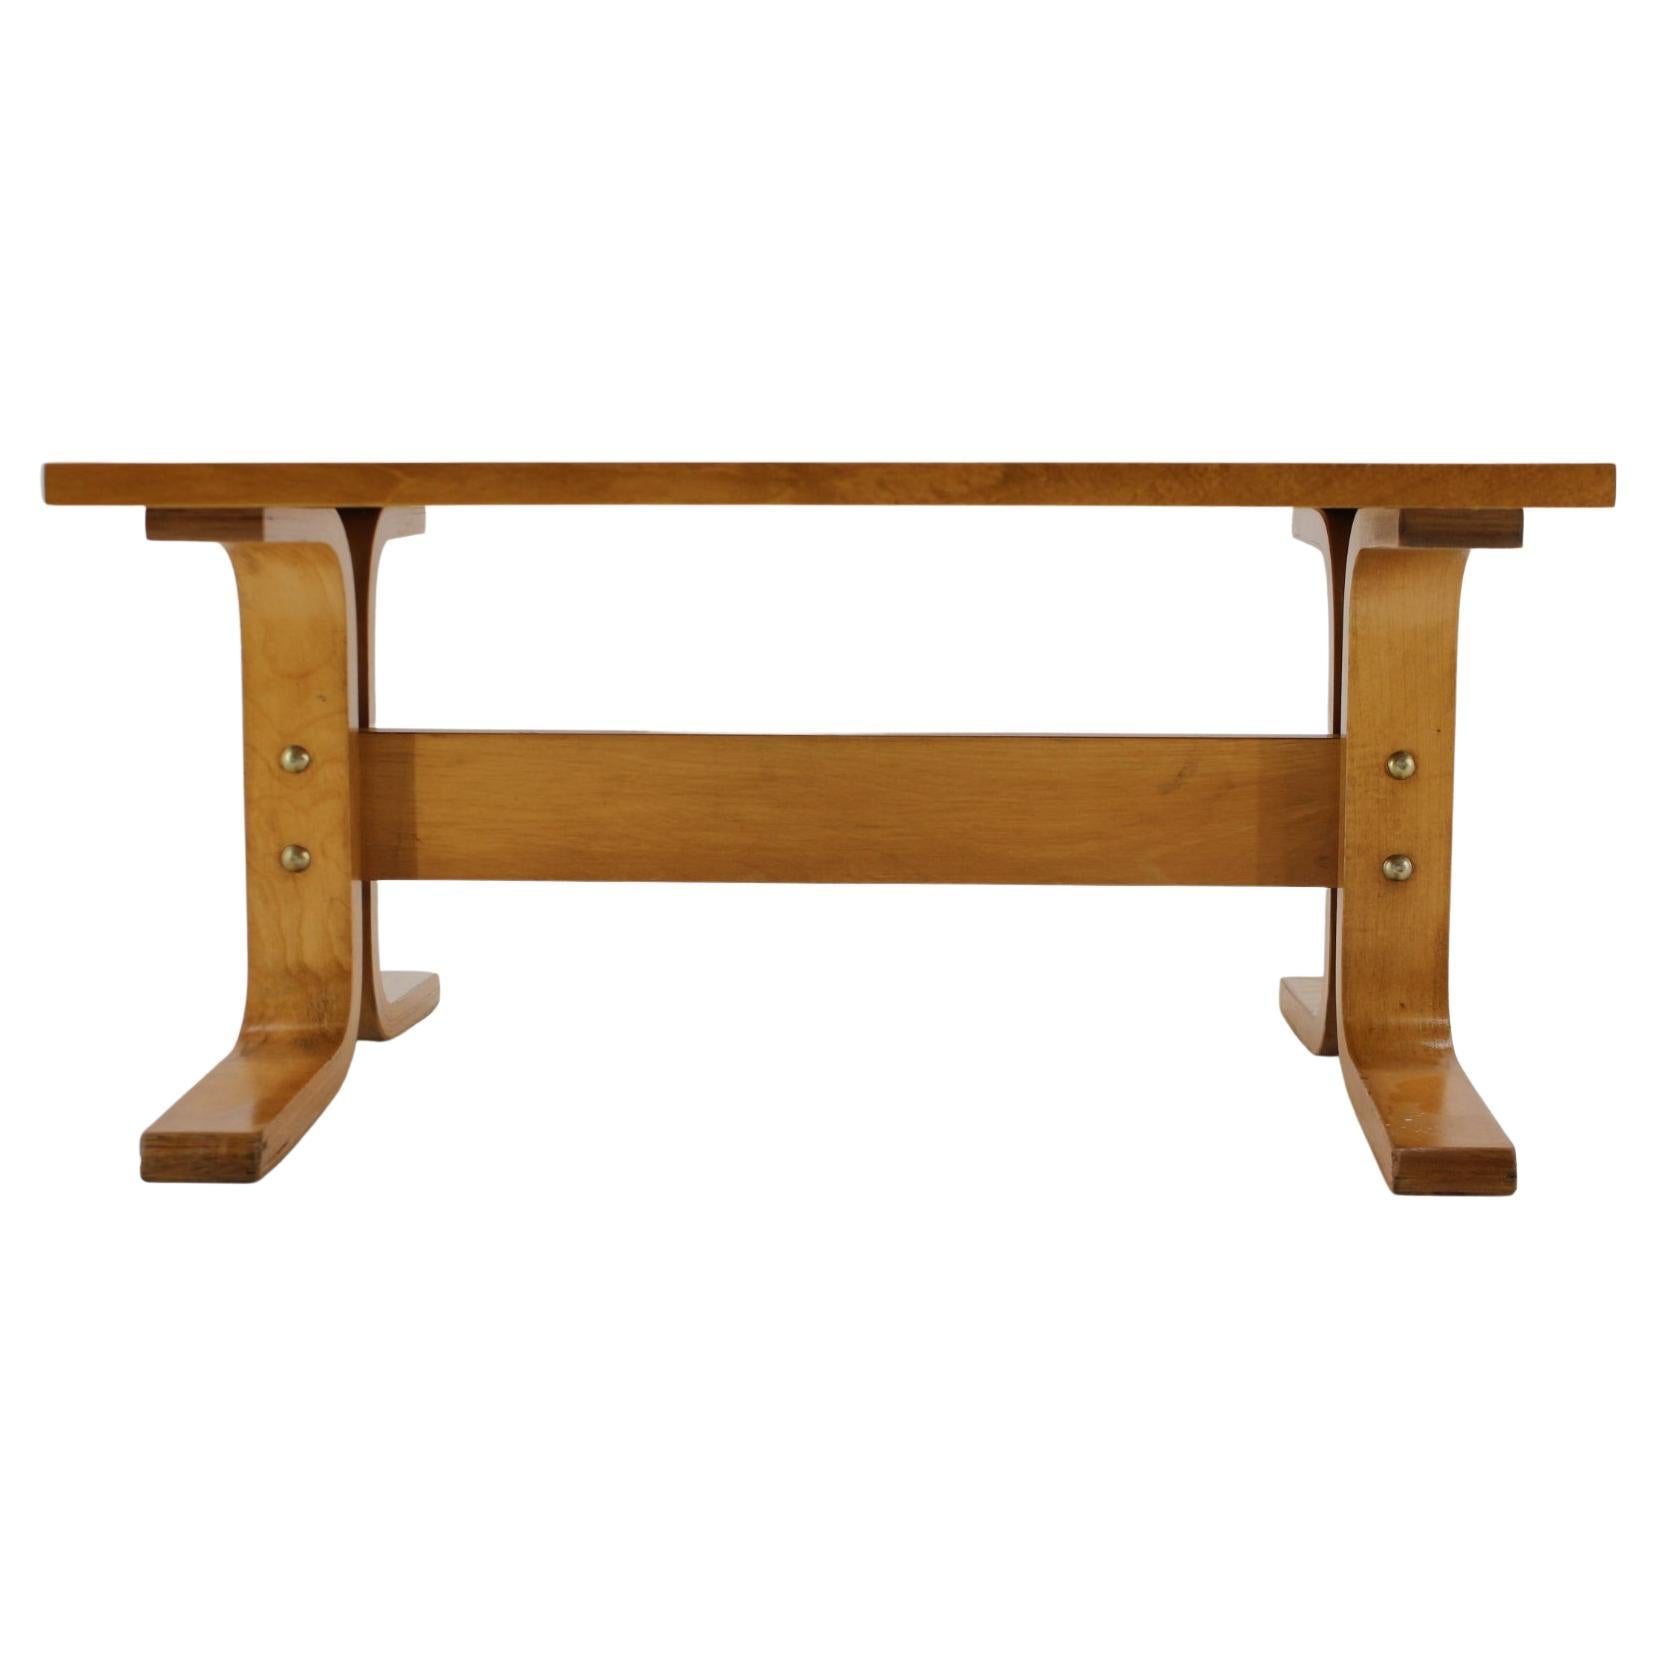 1970s, Beech Bench / Planter Stand, Czechoslovakia For Sale